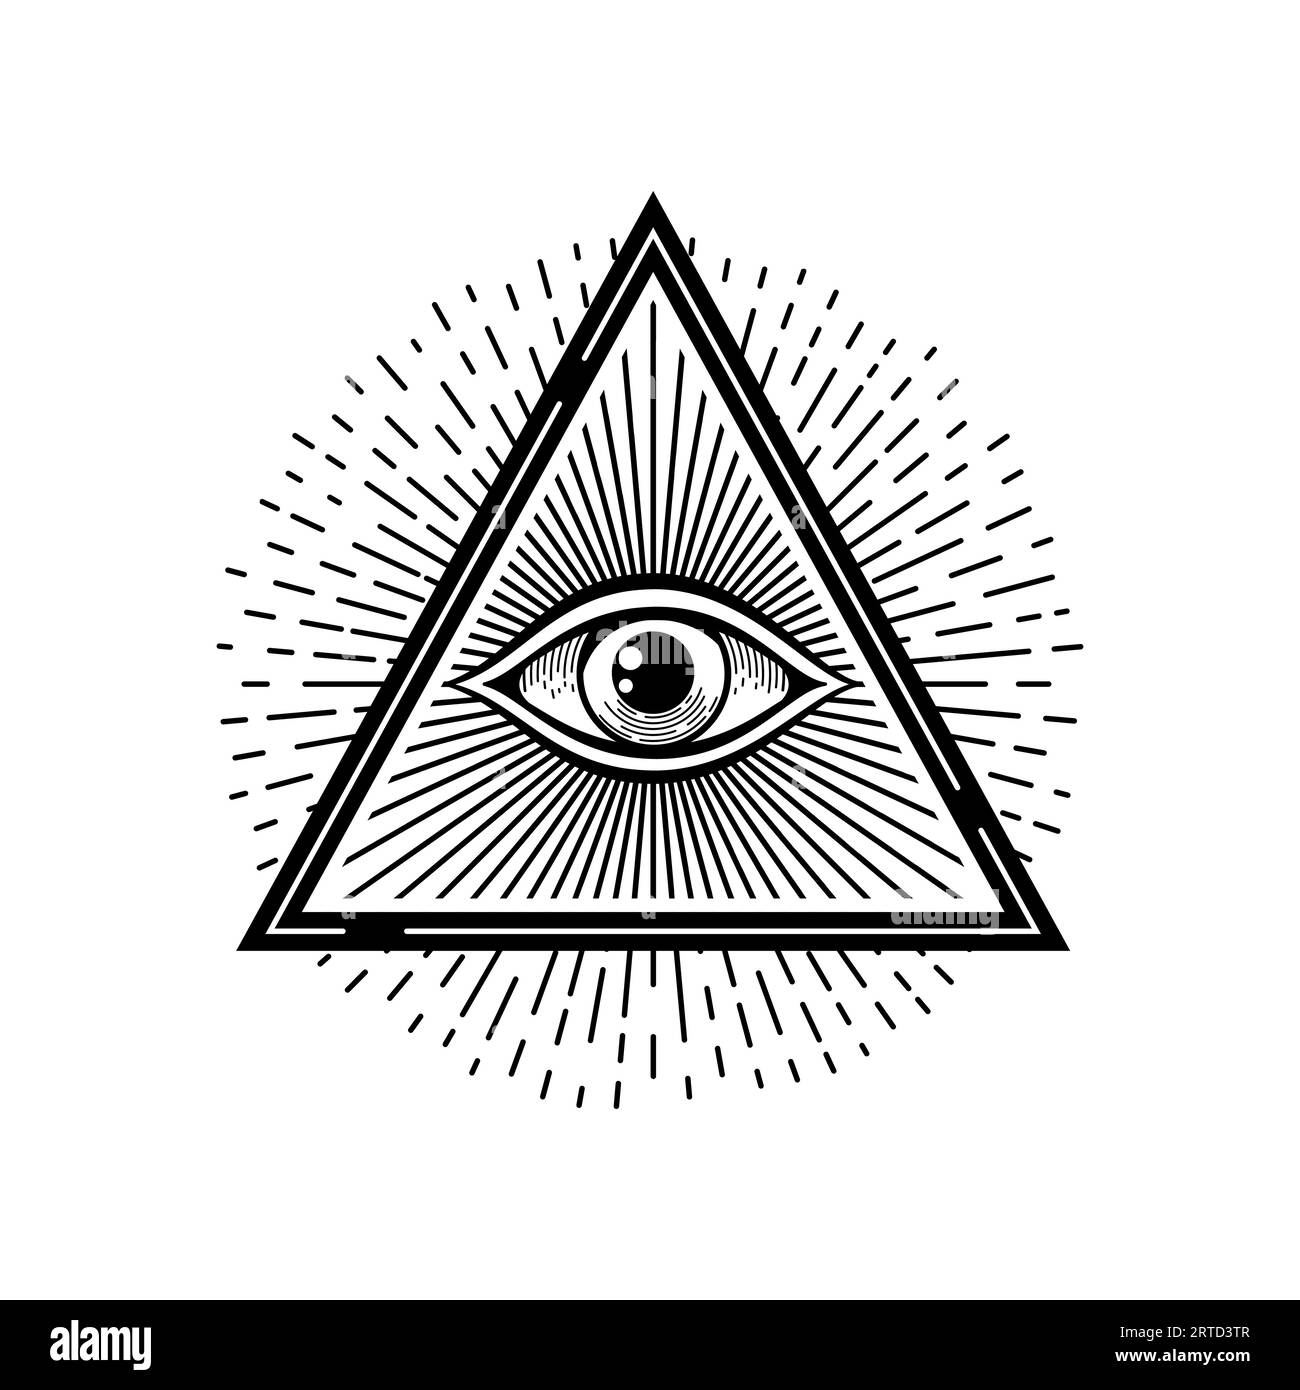 https://c8.alamy.com/comp/2RTD3TR/pyramid-eye-magical-esoteric-religion-mystical-sign-in-triangle-shape-doodle-style-vector-occult-providence-symbol-sacred-magical-eye-2RTD3TR.jpg